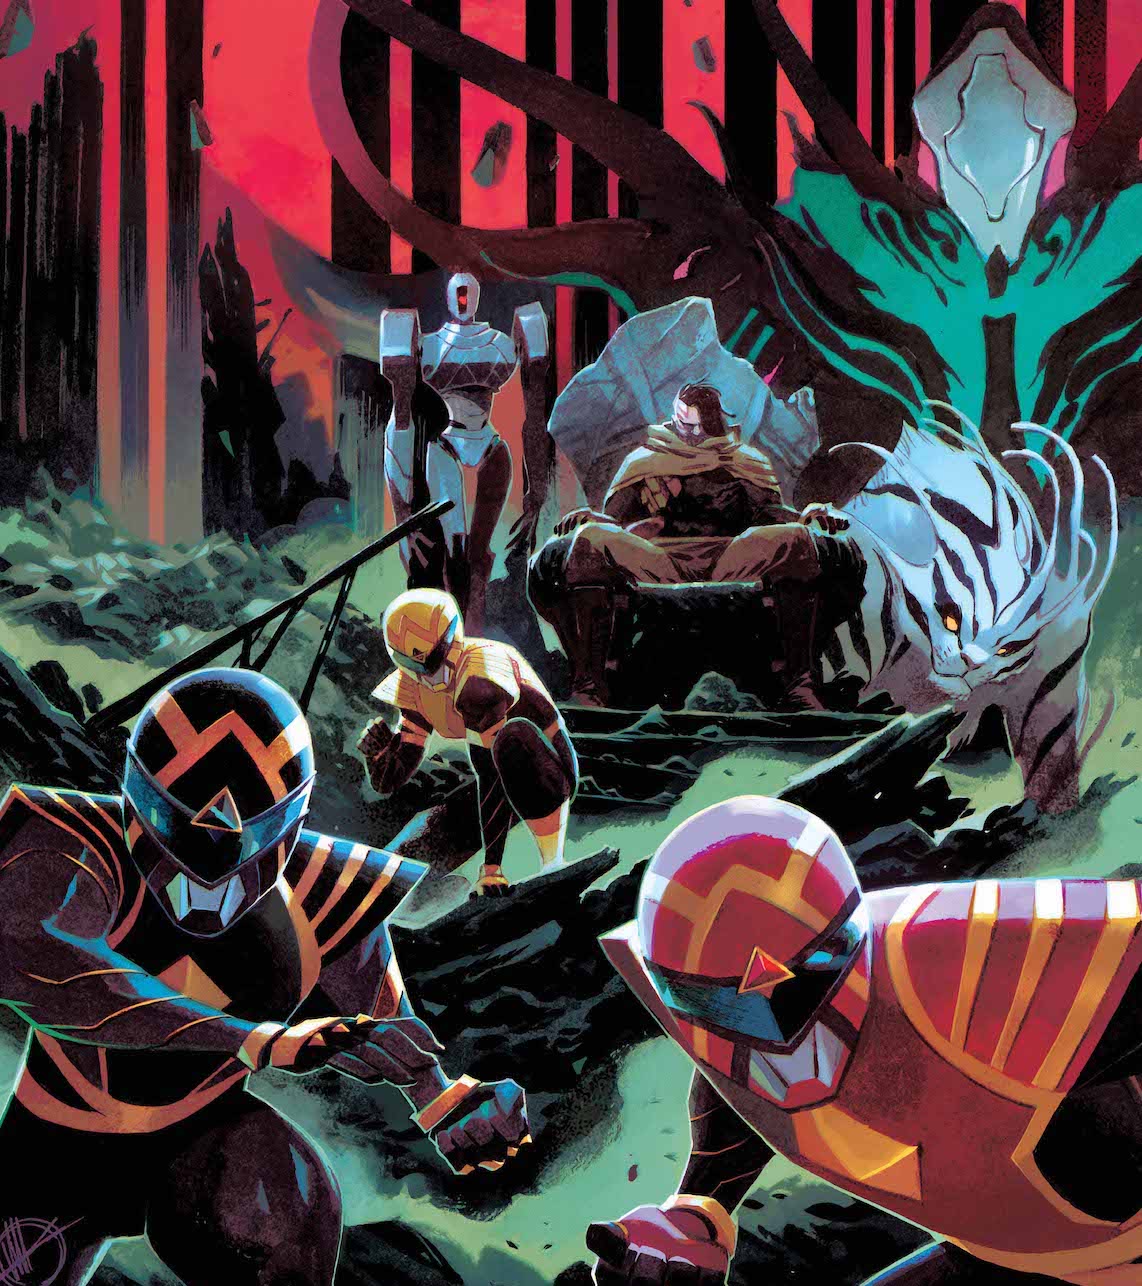 EXCLUSIVE BOOM! Preview: Power Rangers #4